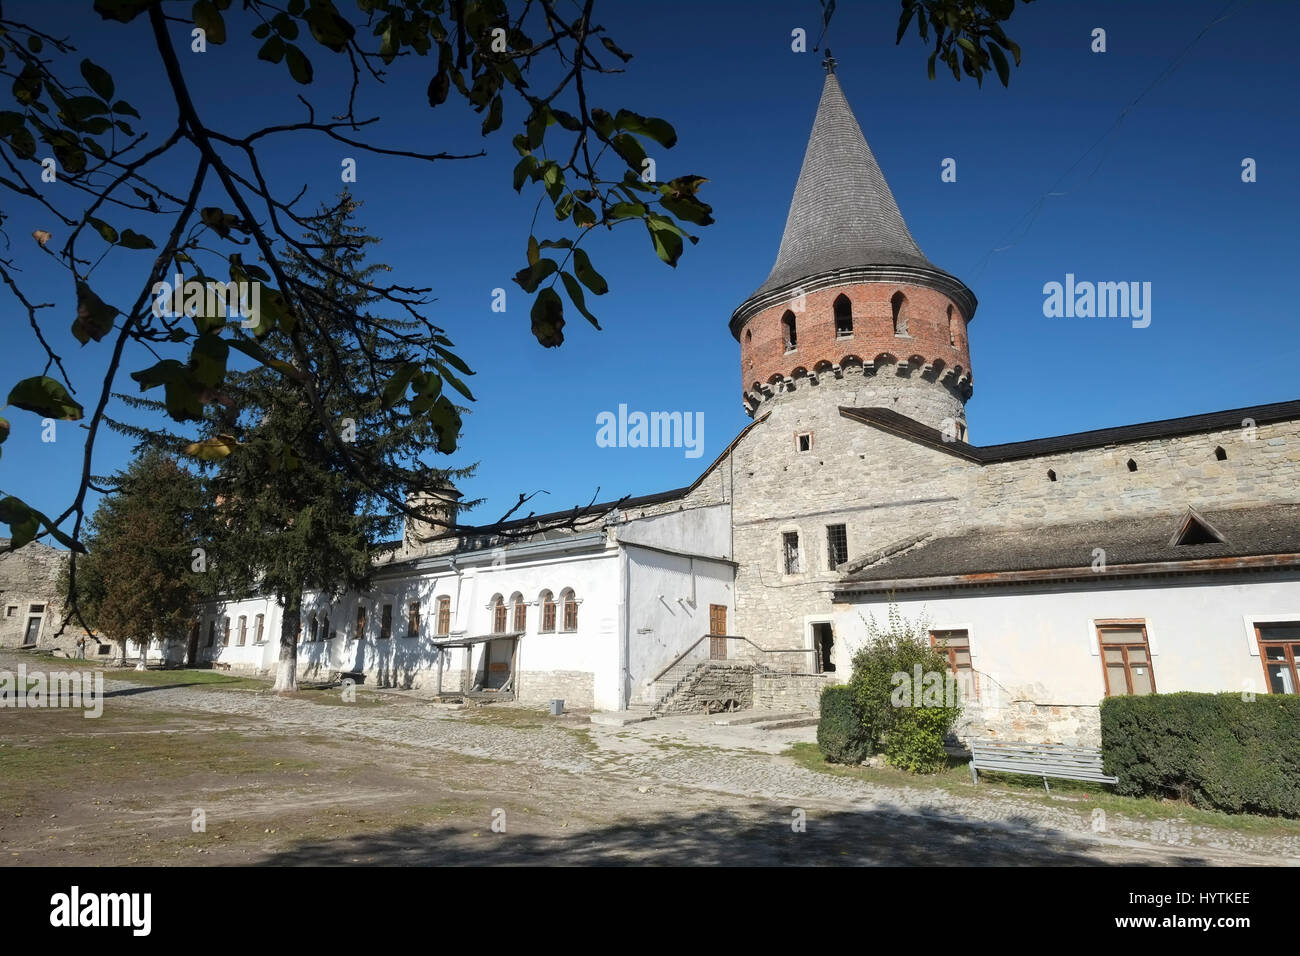 Inner courtyard and tower of Kamianets-Podilskyi castle in Western Ukraine. Shot on a beautiful clear autumn day with blue skies. Stock Photo